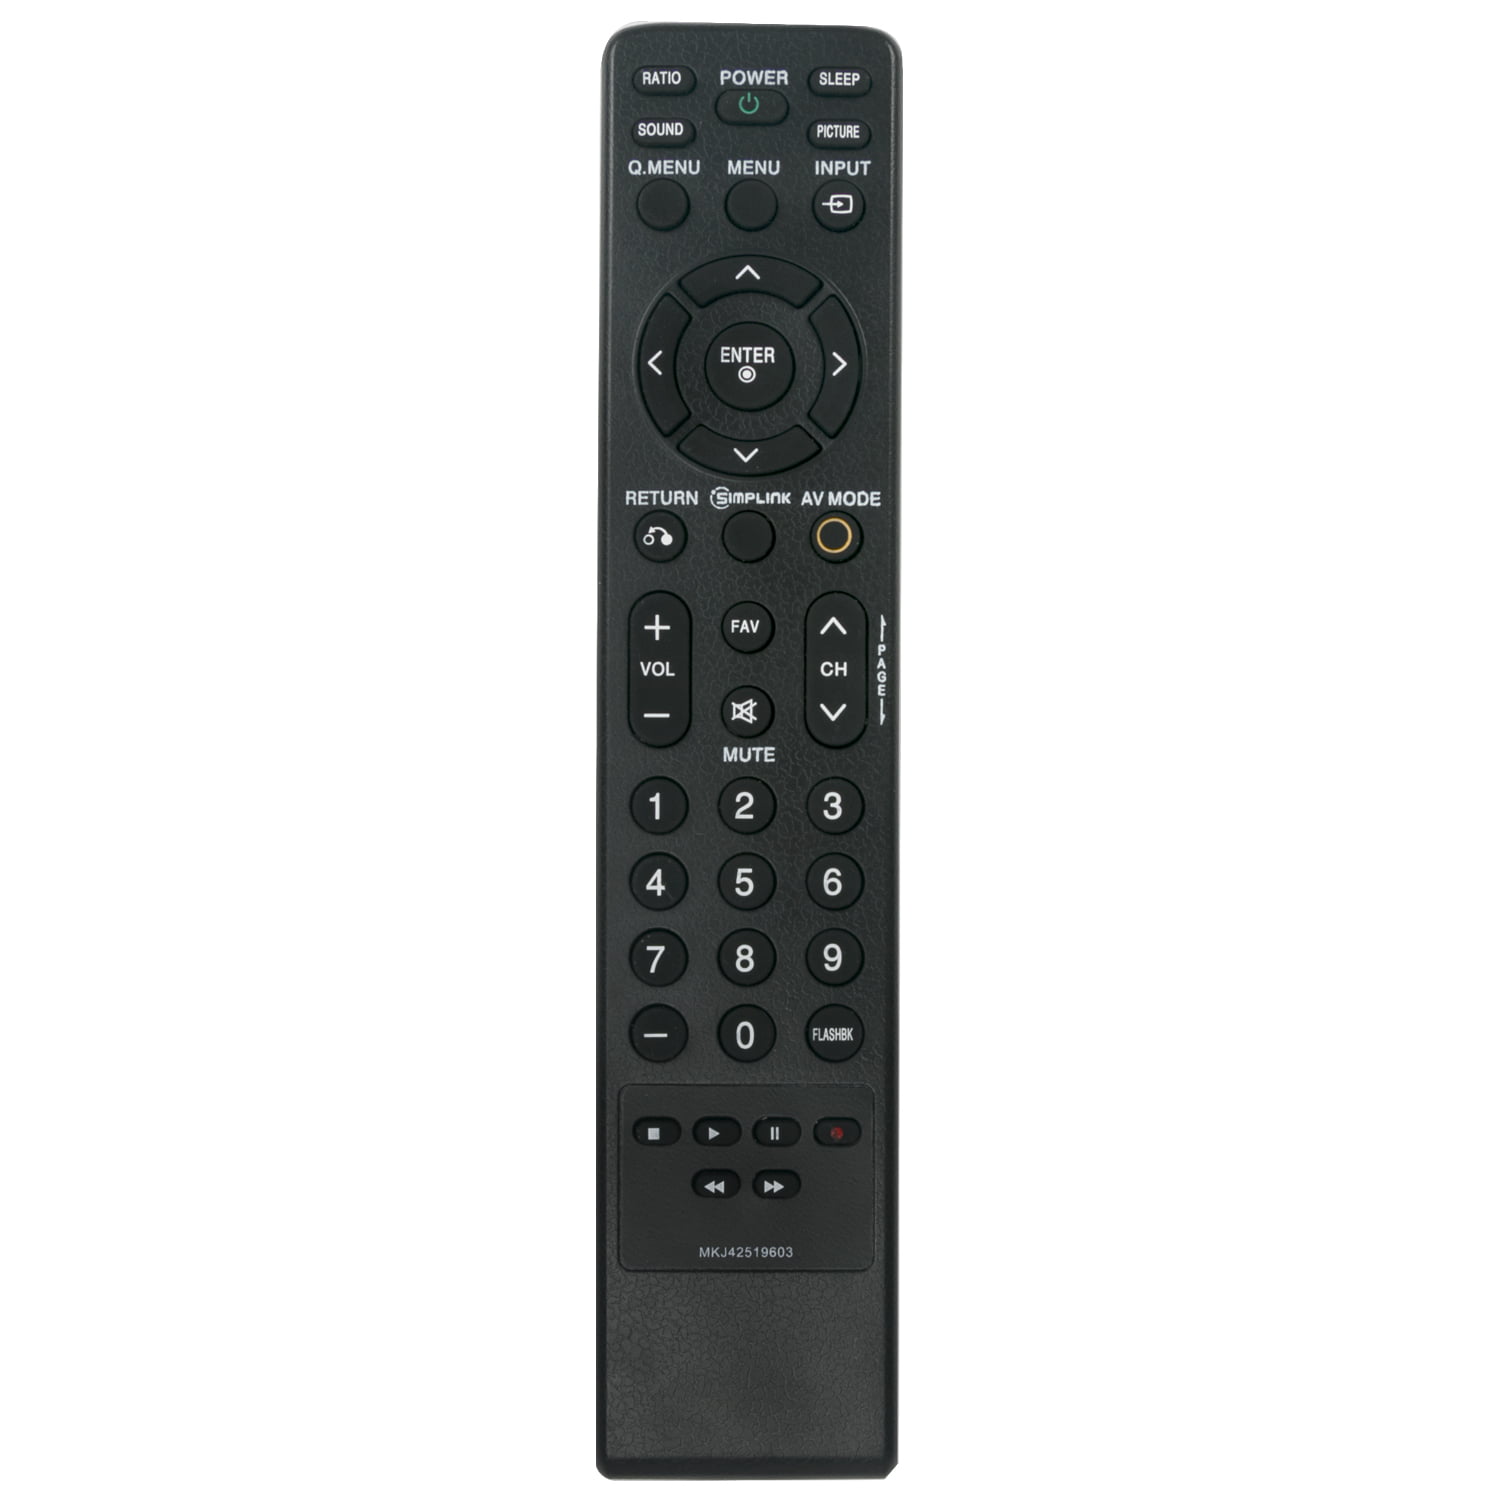 New Remote Control Replace AKB74455416 for LG Smart LED HDTV 43LF5900 49LF5900